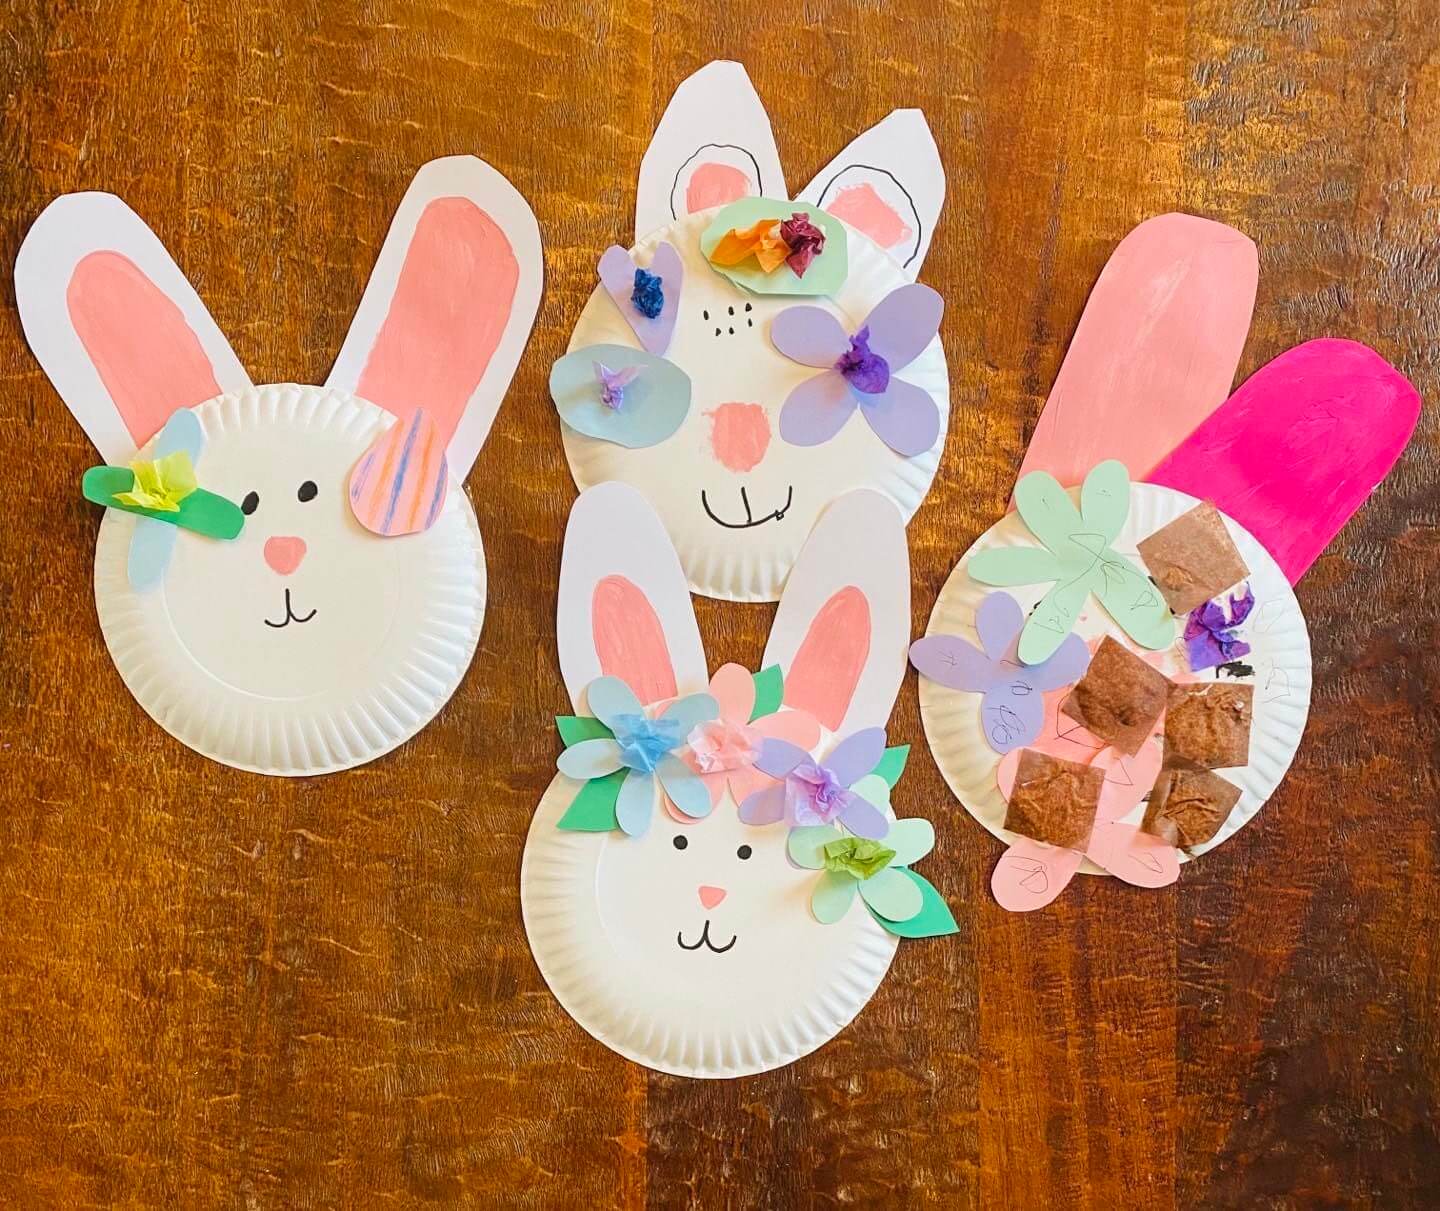 Four paper plates decorated with Easter Bunny faces on them, laying on a wooden table.